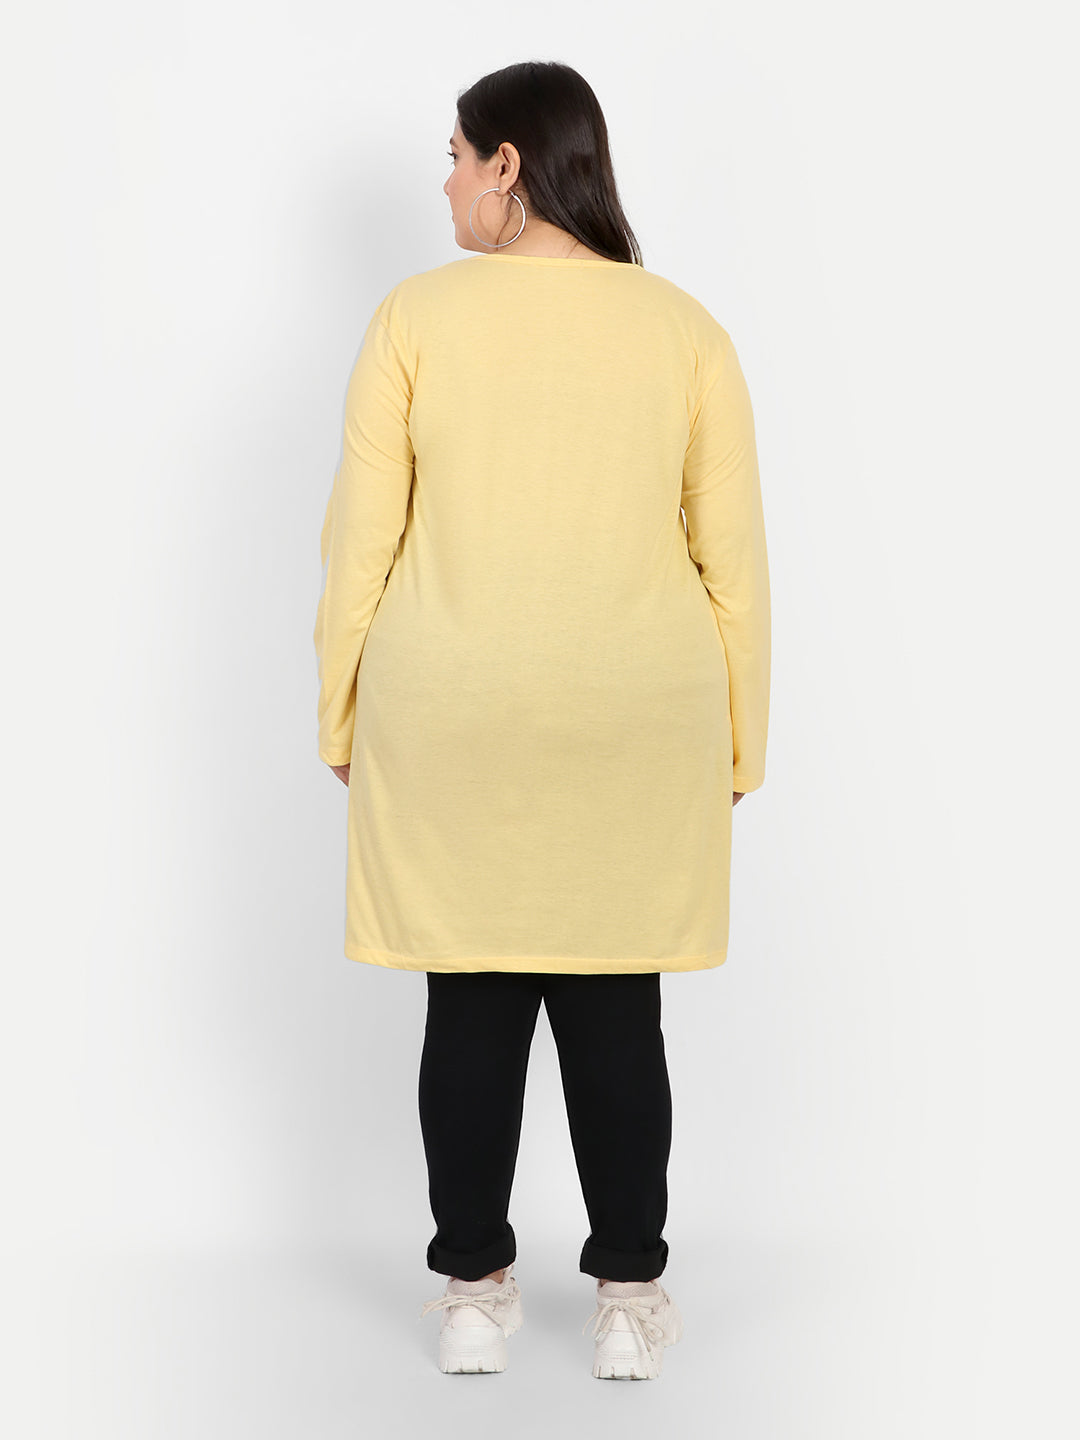 Plus Size Cotton Long Tops for Women Full Sleeves - Pack of 2 (Yellow & Rosy Pink)